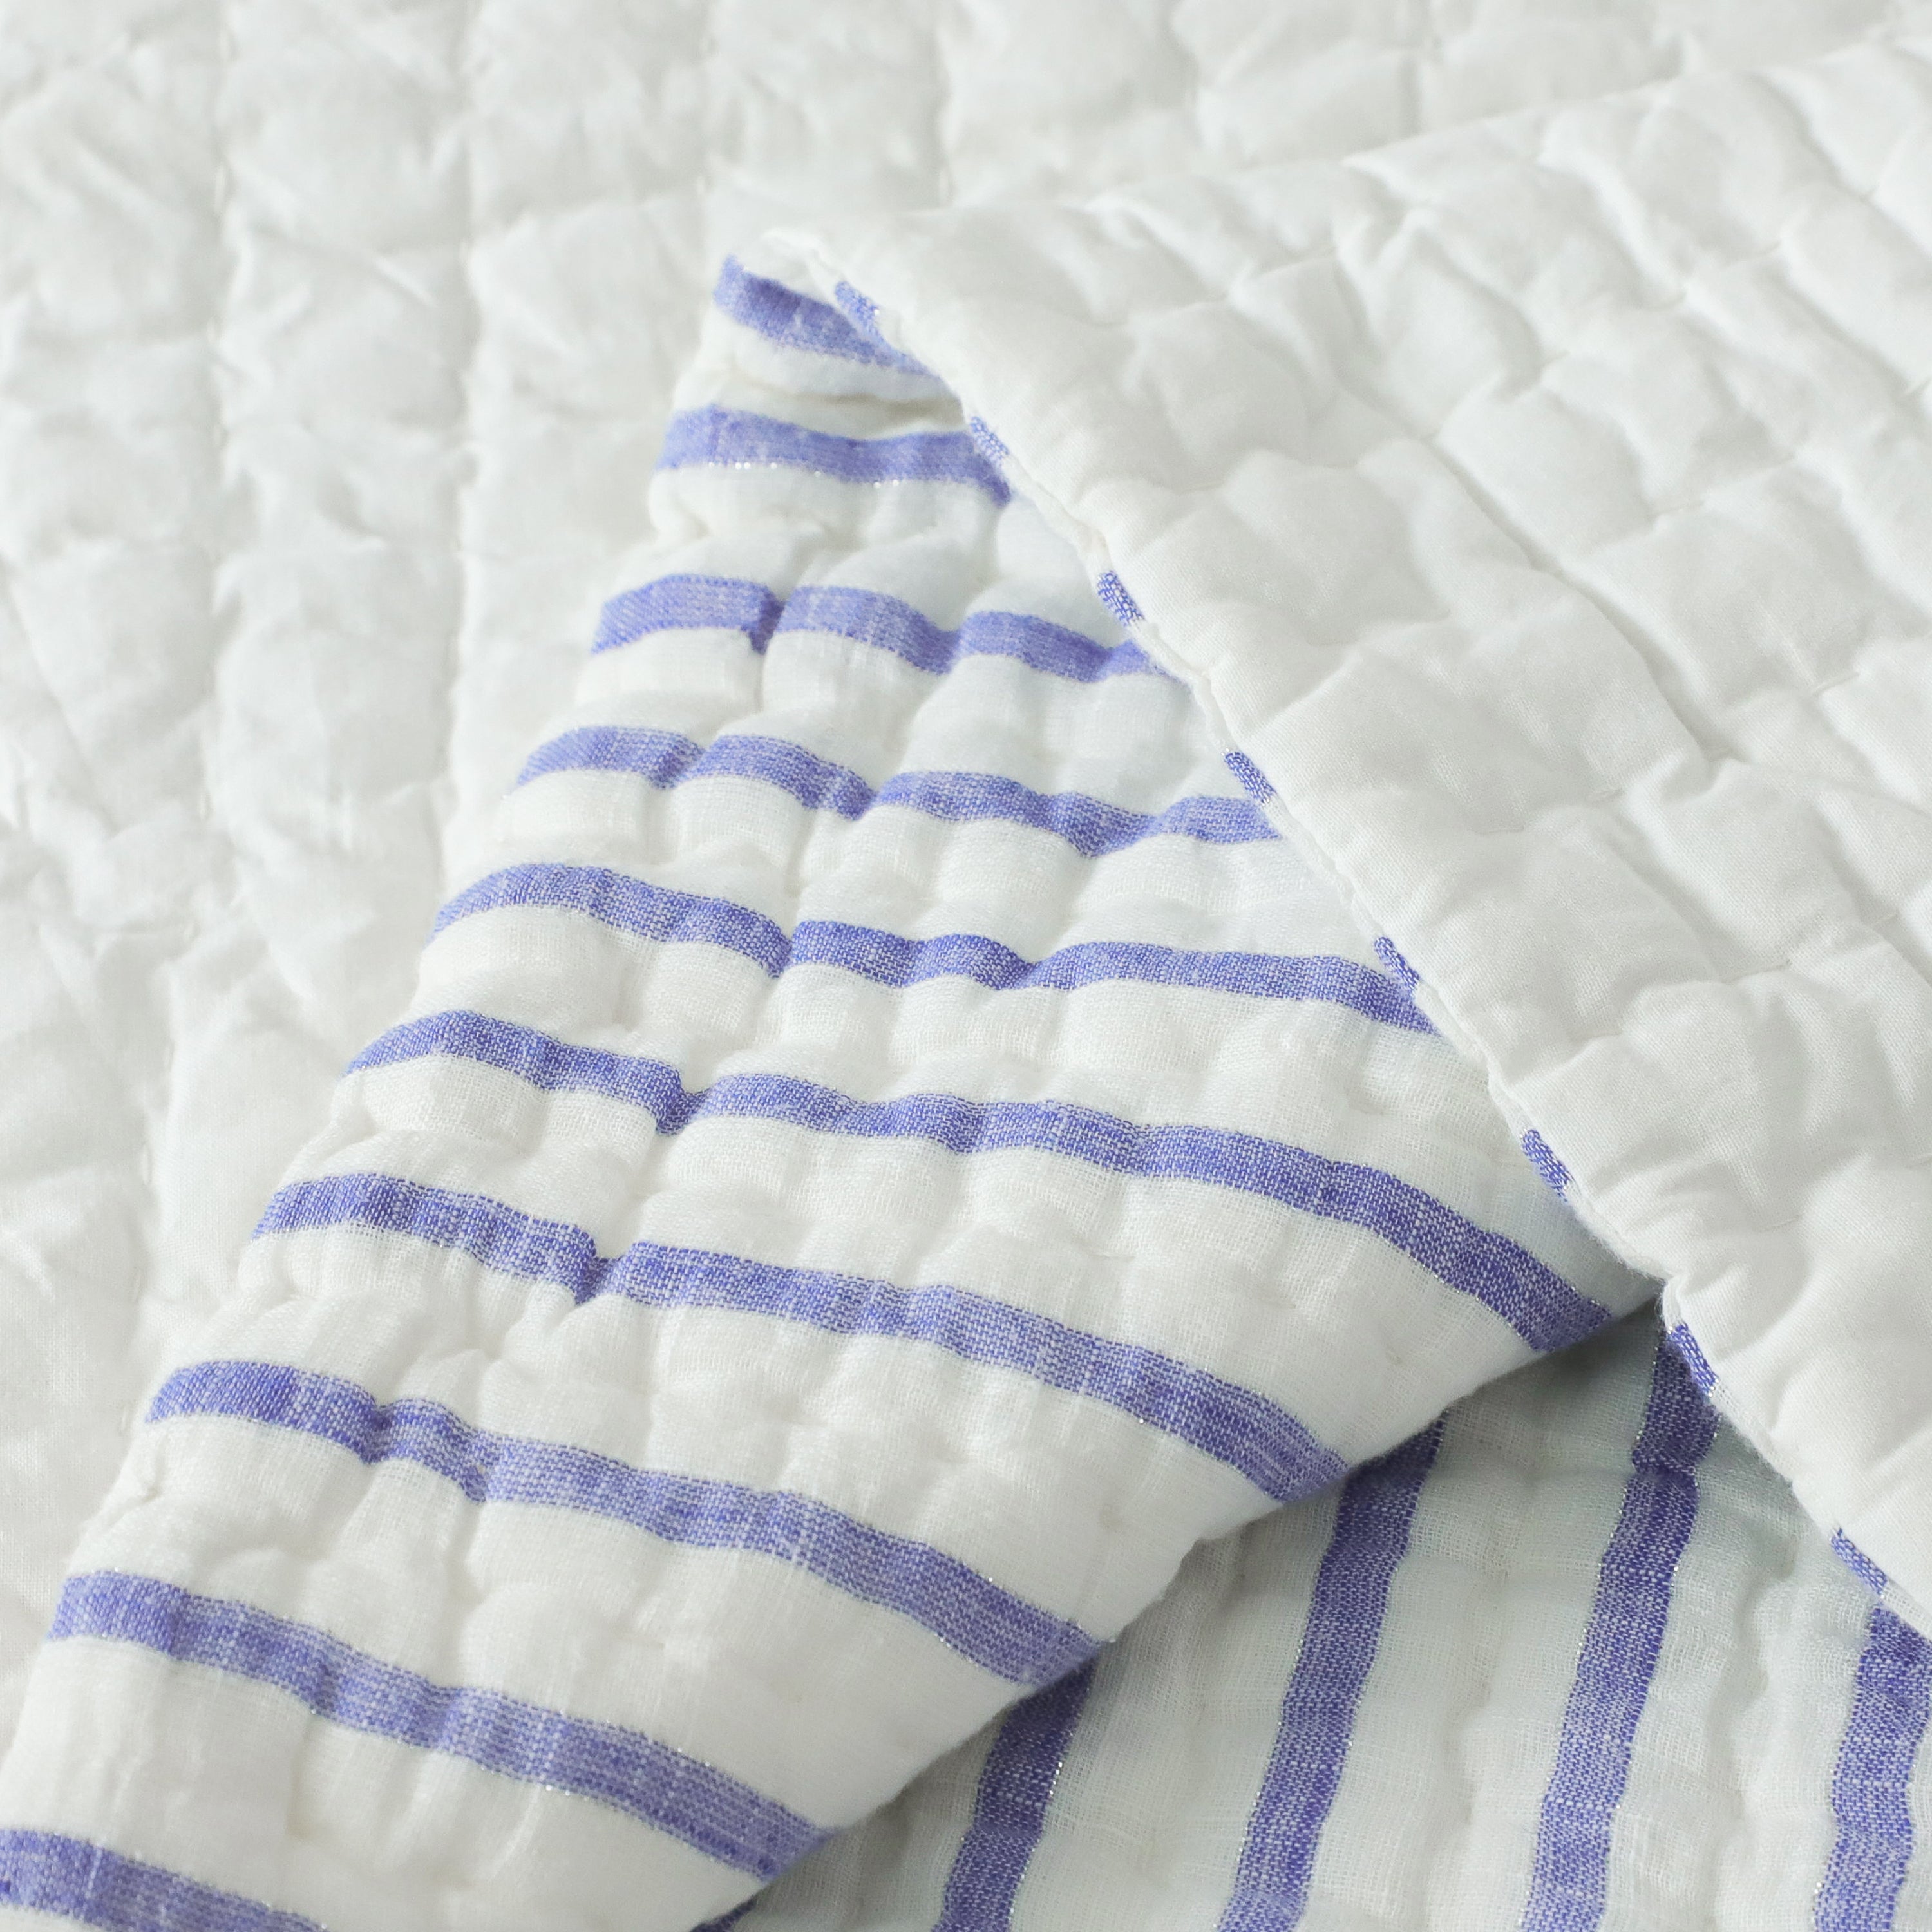 Handmade quilt reverses to solid cotton batting. The quilt is reversible and creates a cool summer vibe.